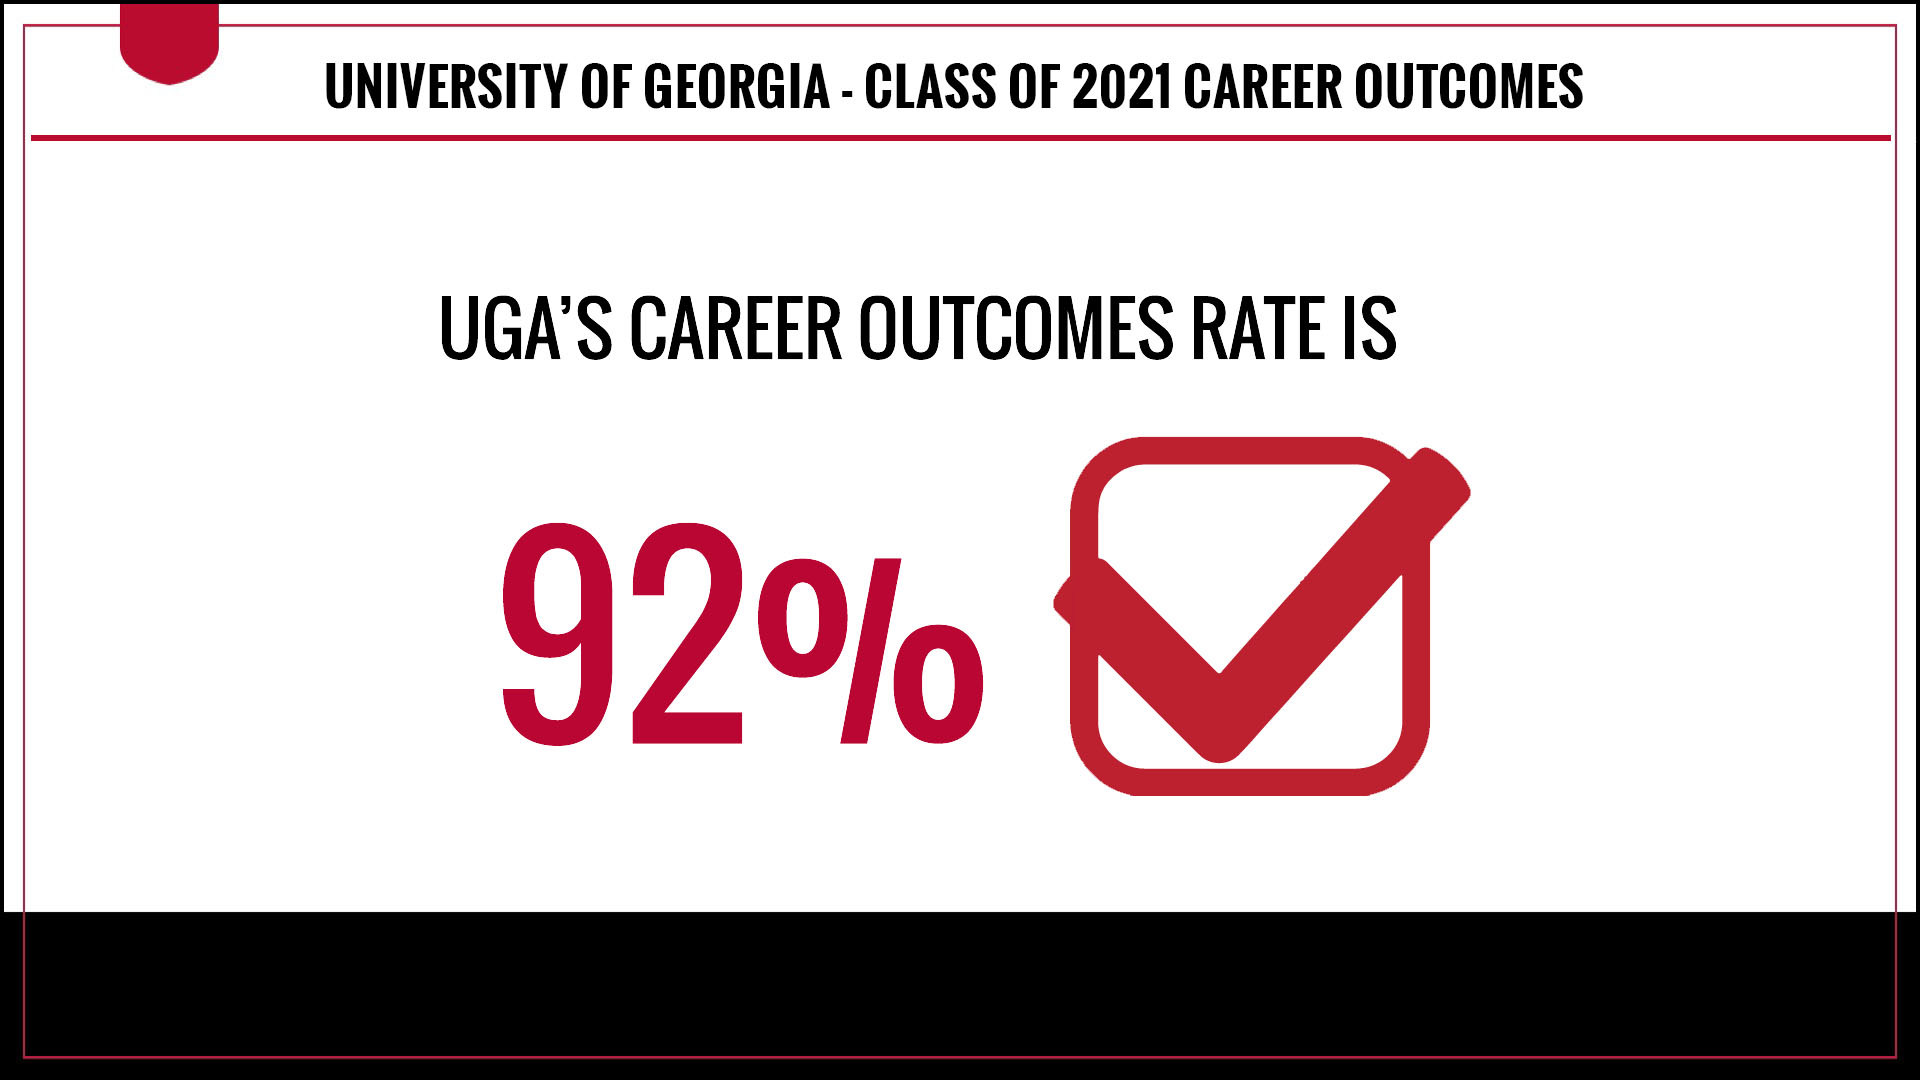 UGA's Class of 2021 Career Outcomes rate is 92 percent